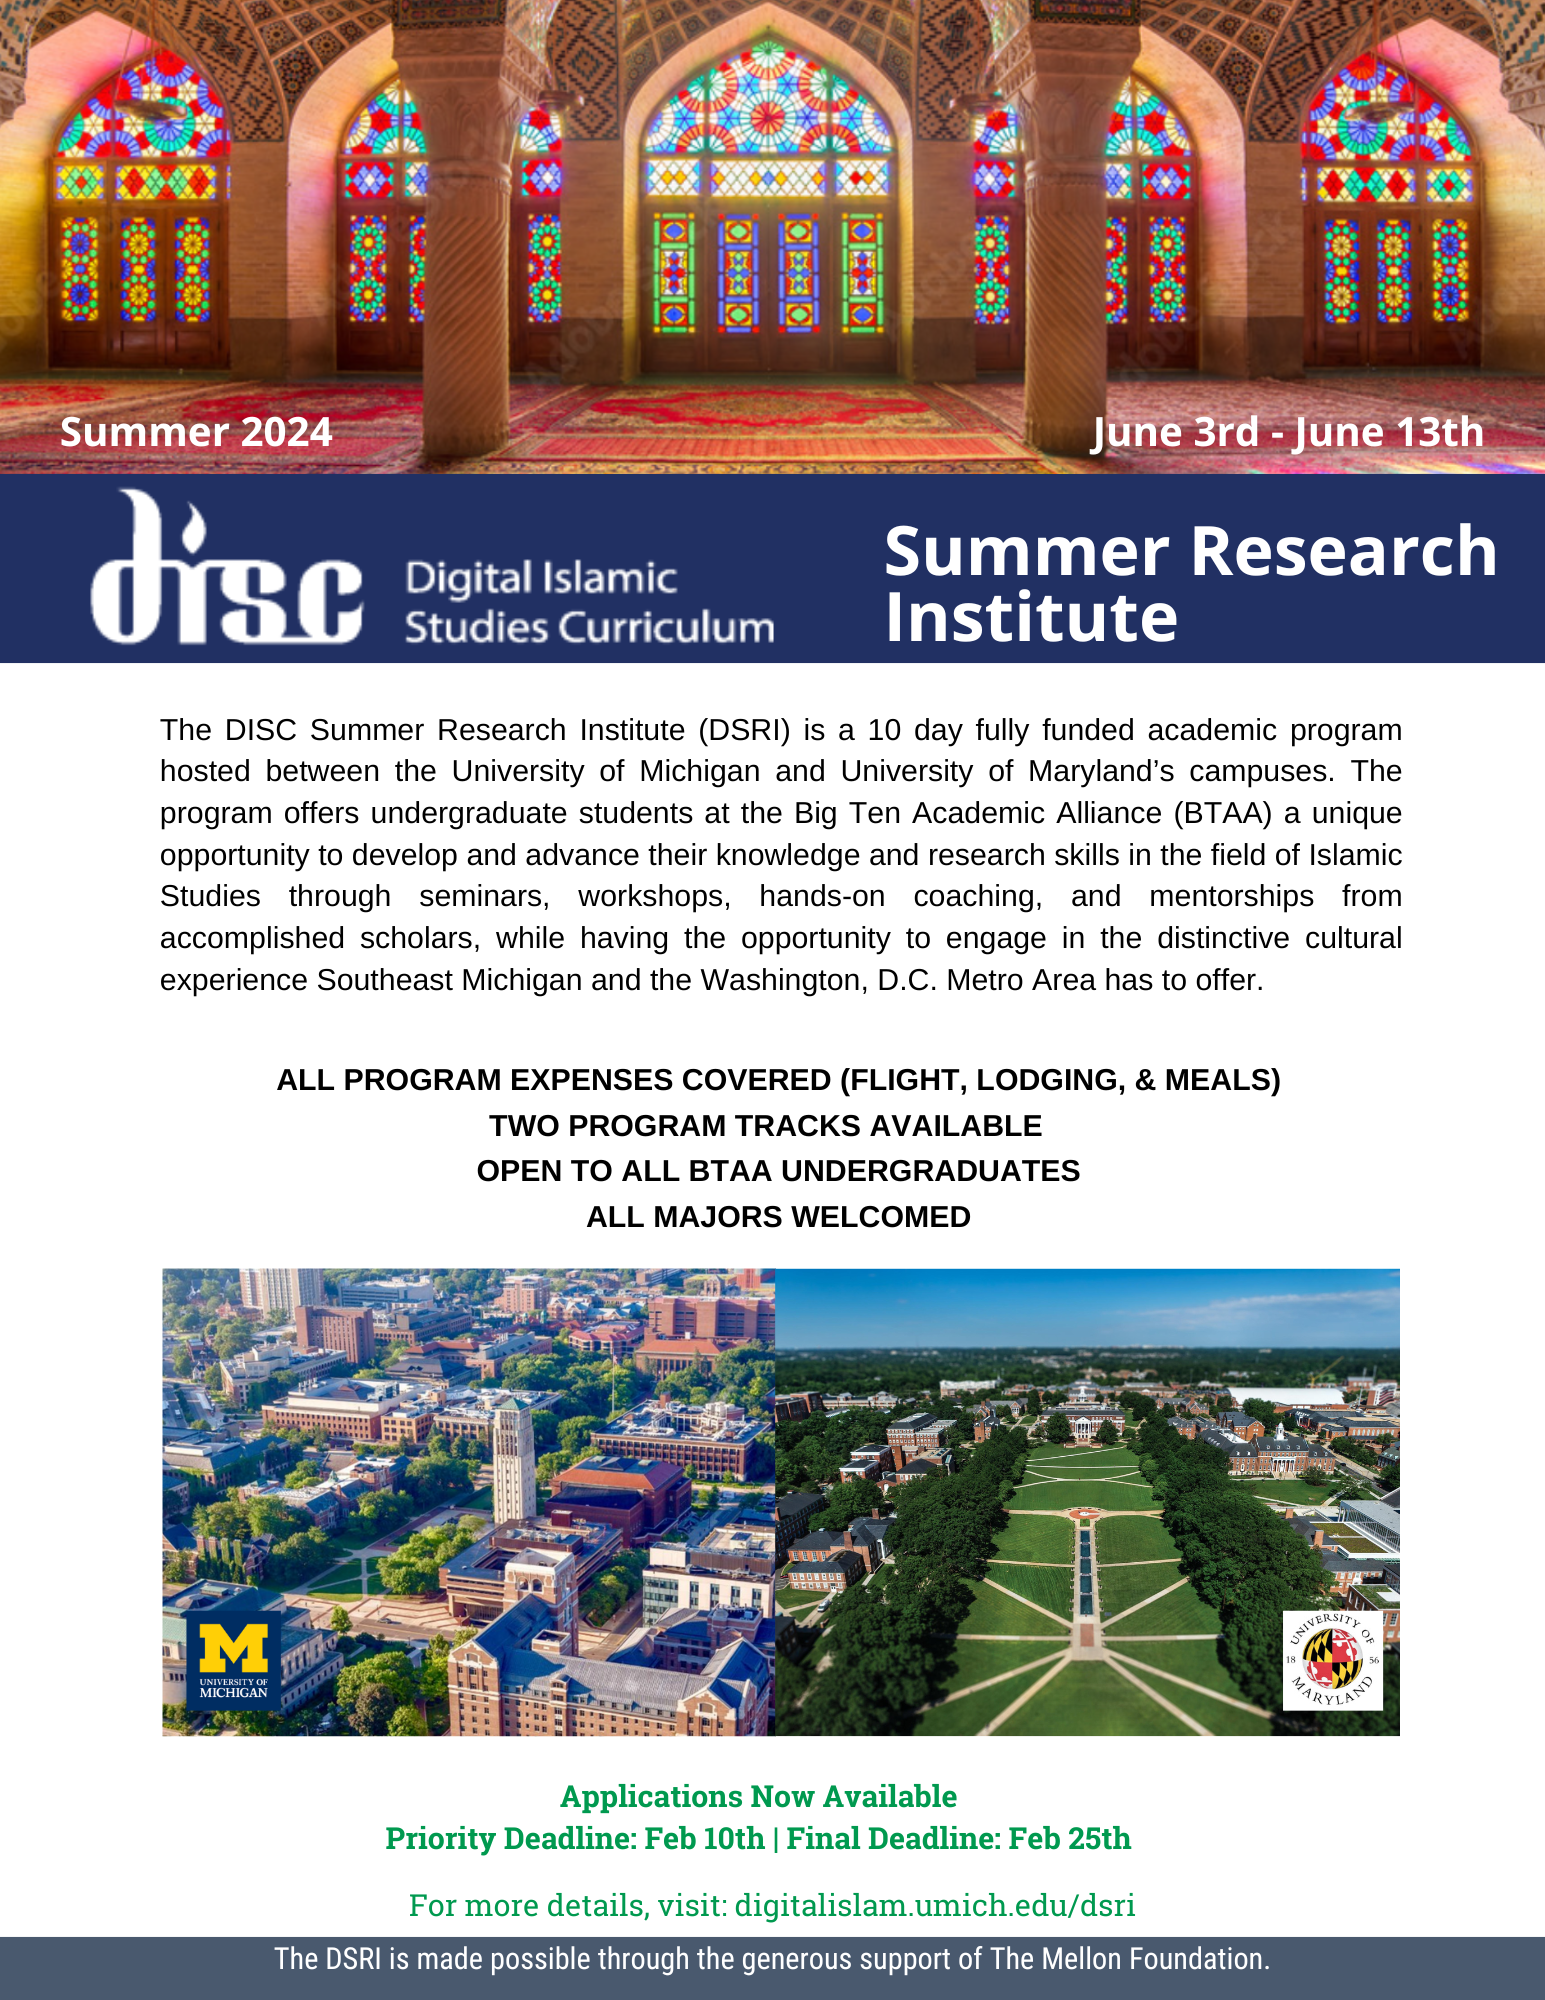 DISC Summer Research Institute Flyer